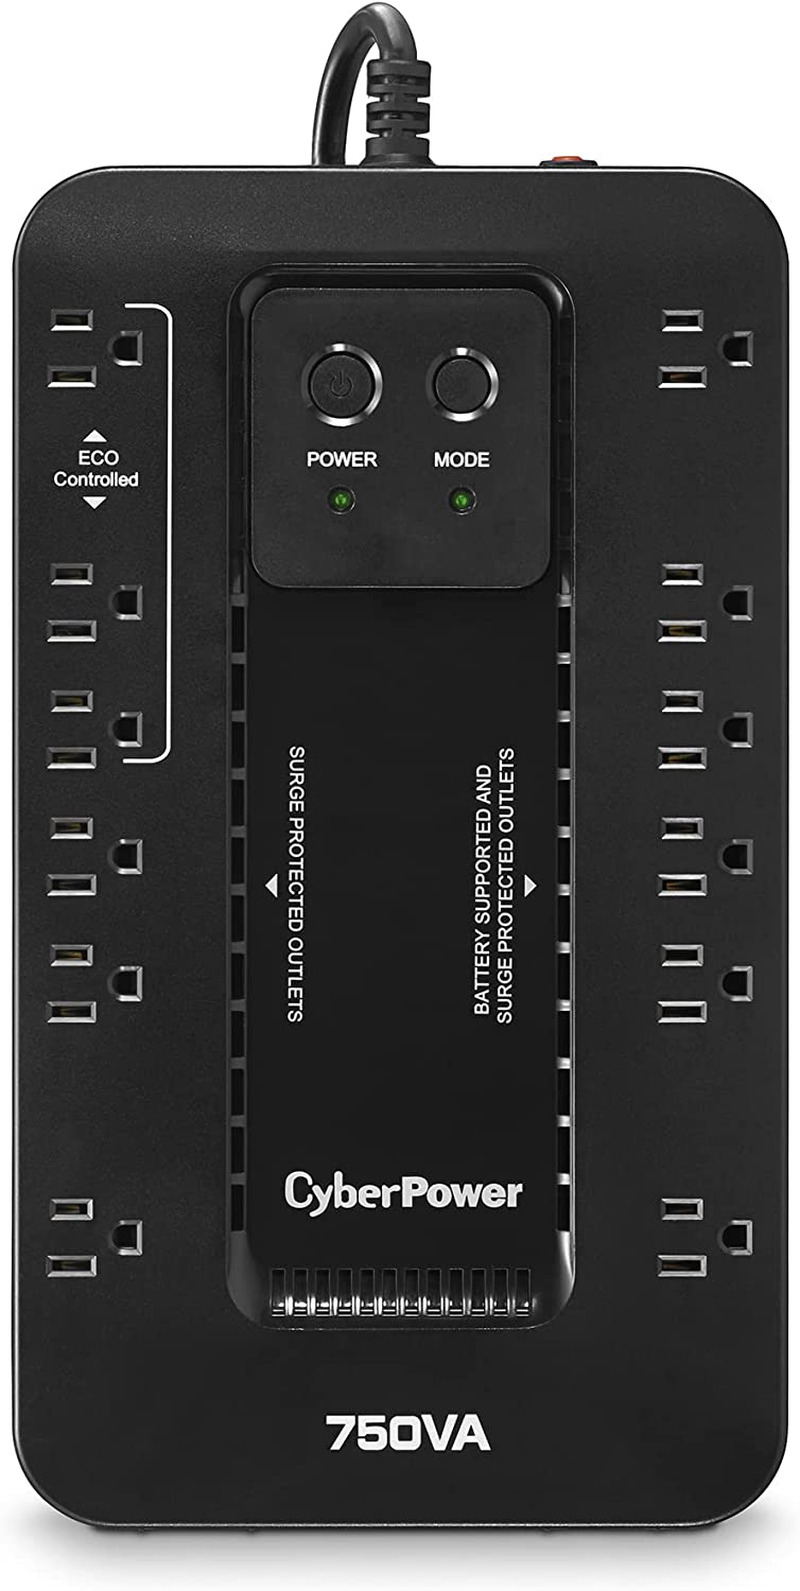 Cyberpower EC750G Ecologic Battery Backup & Surge Protector UPS System, 750VA/45